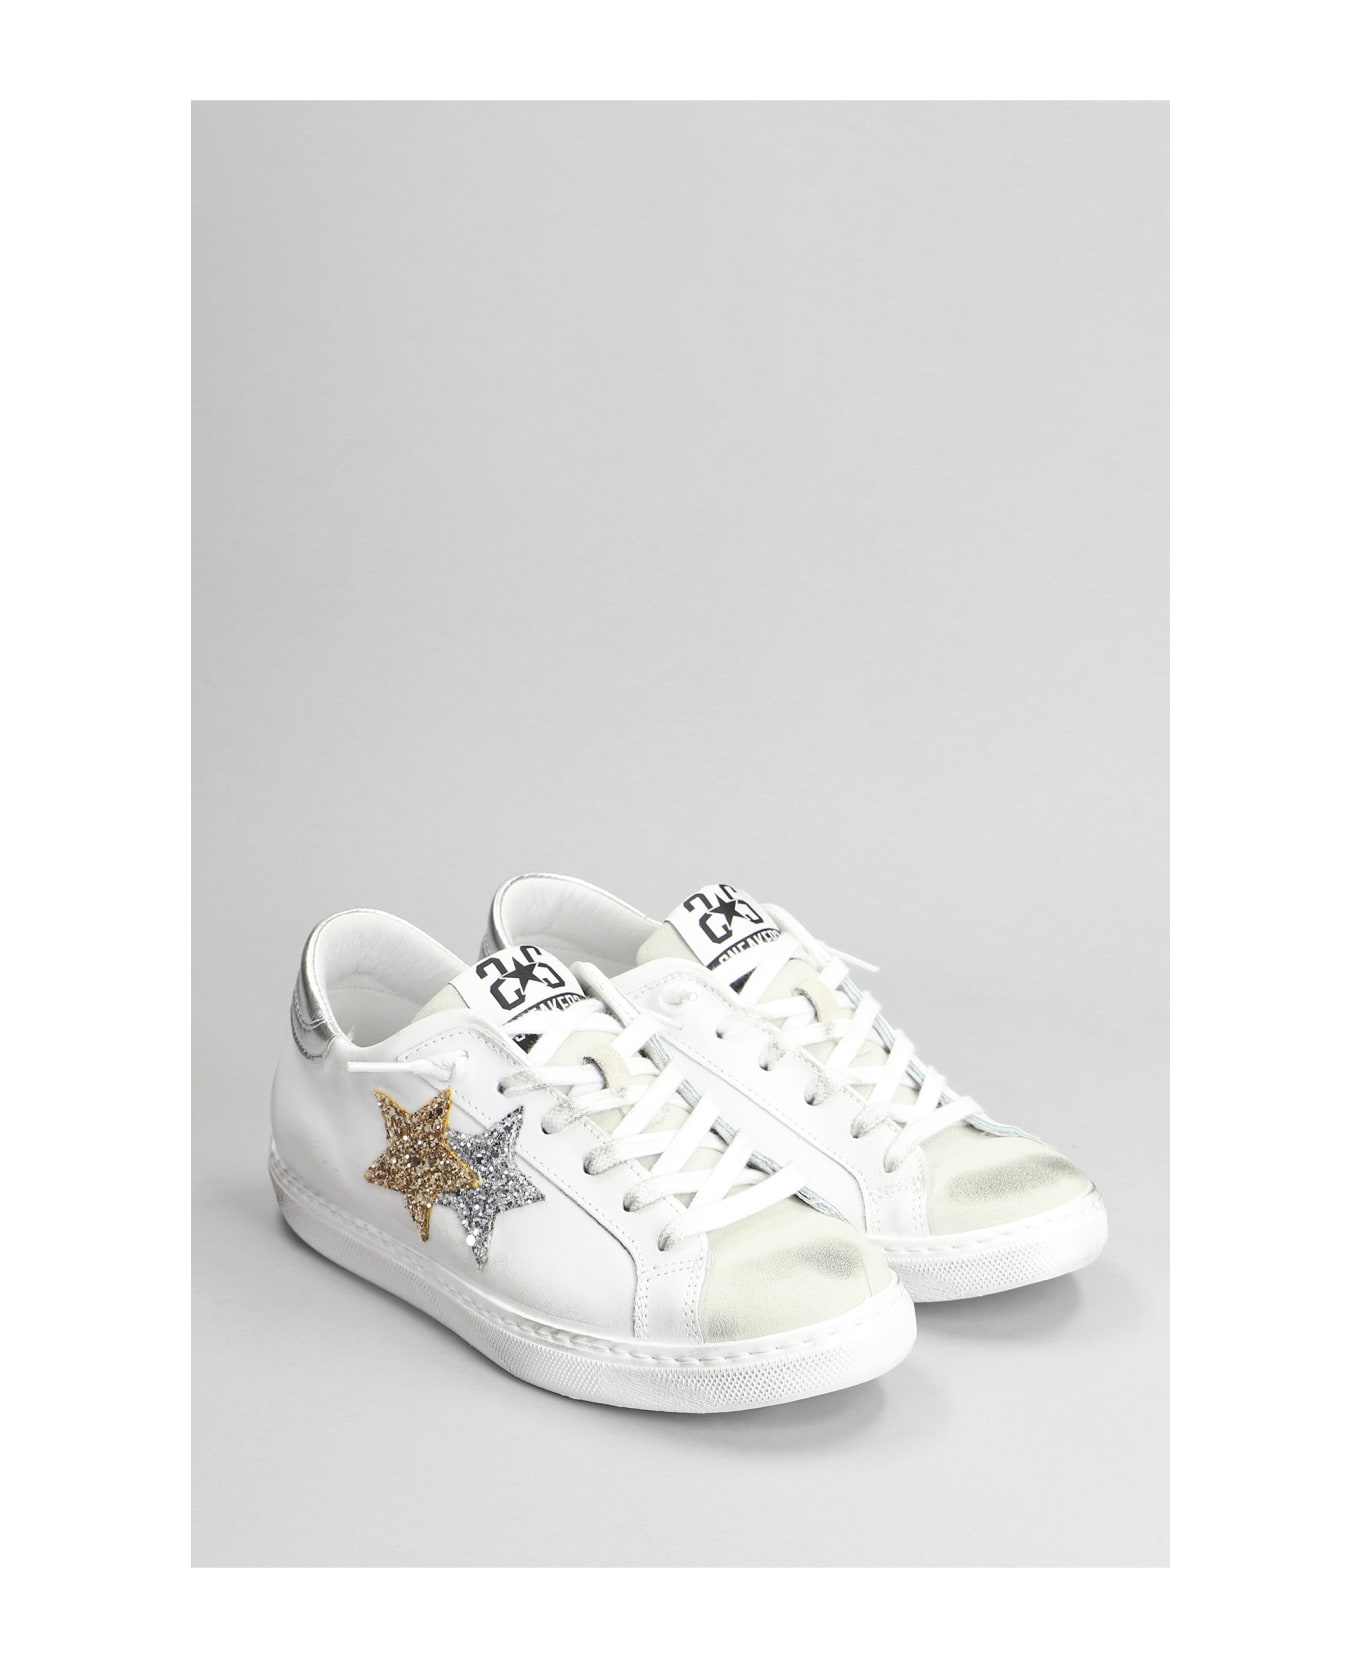 2Star Sneakers In White Suede And Leather 2Star - WHITE